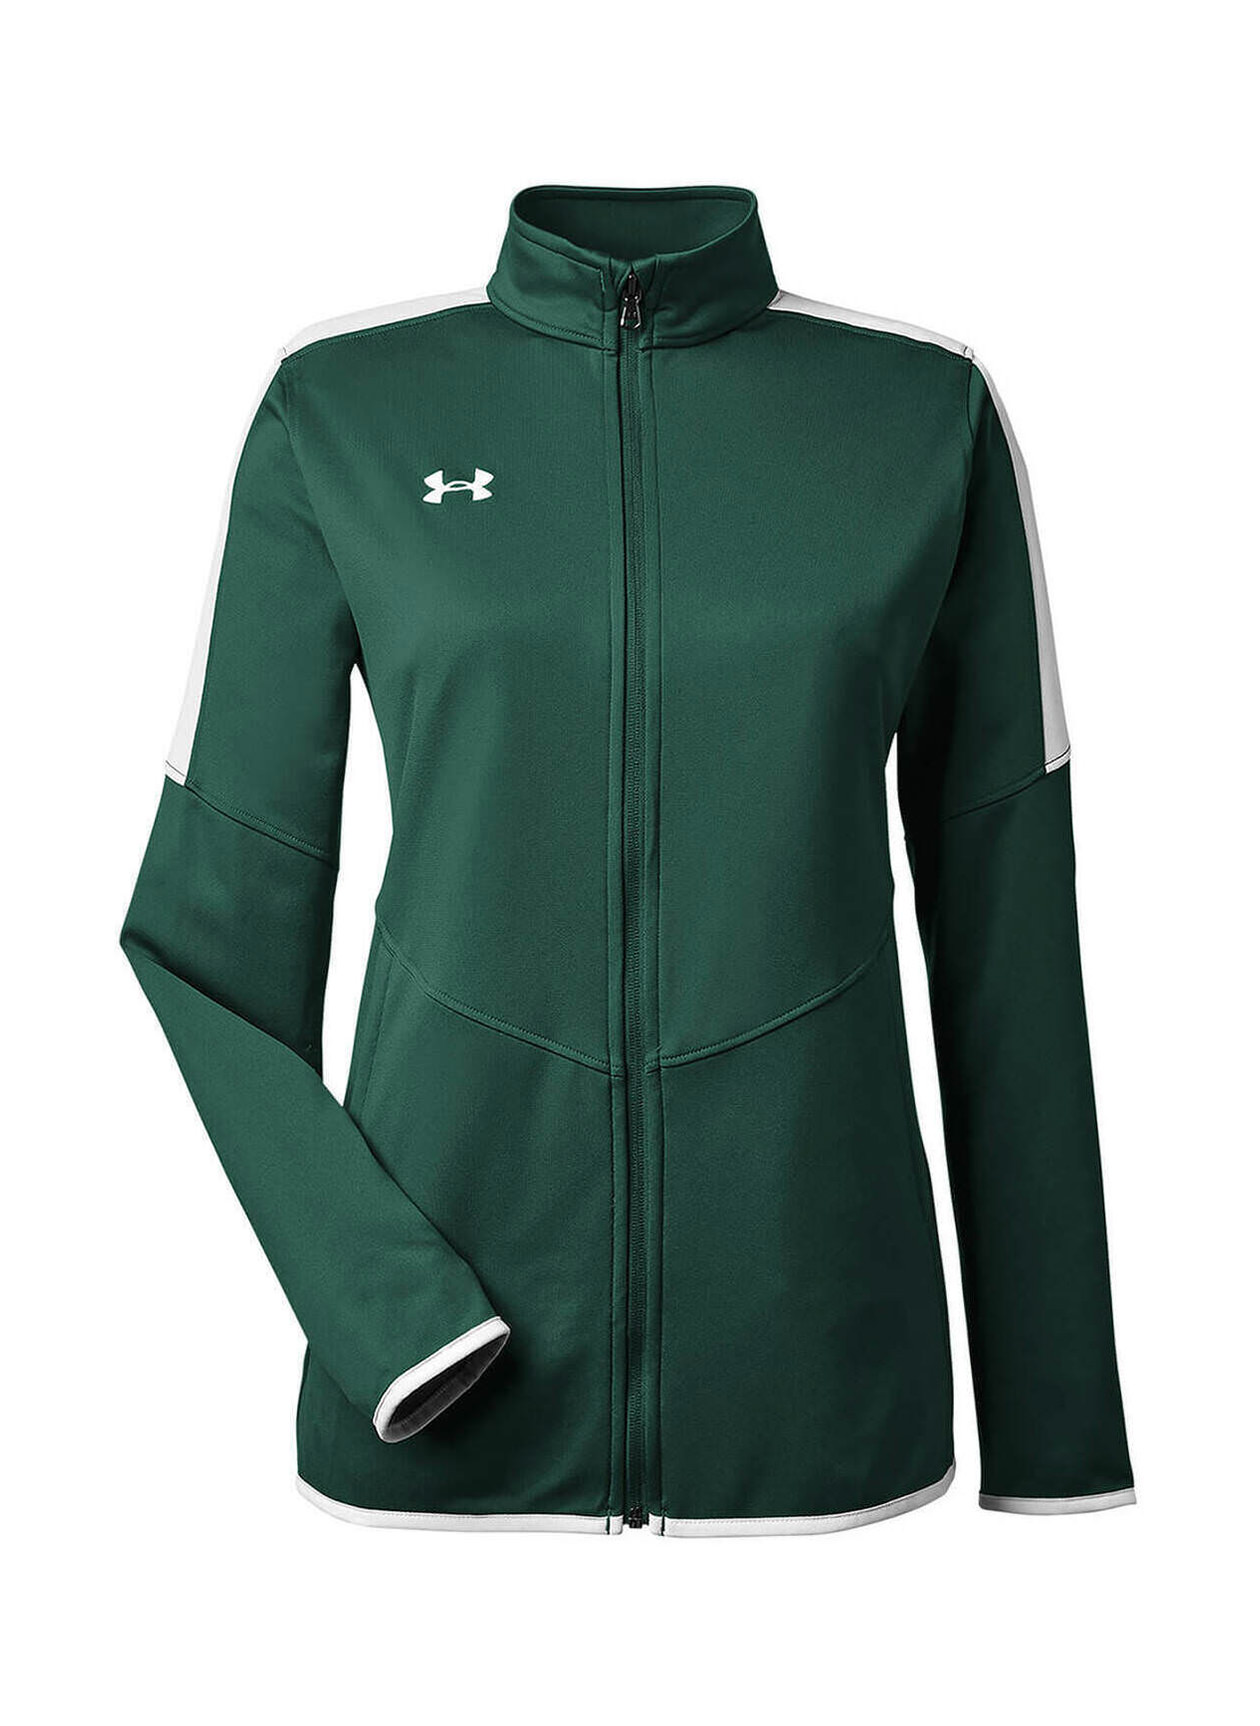 Under Armour Women's Forest Green Rival Knit Jacket